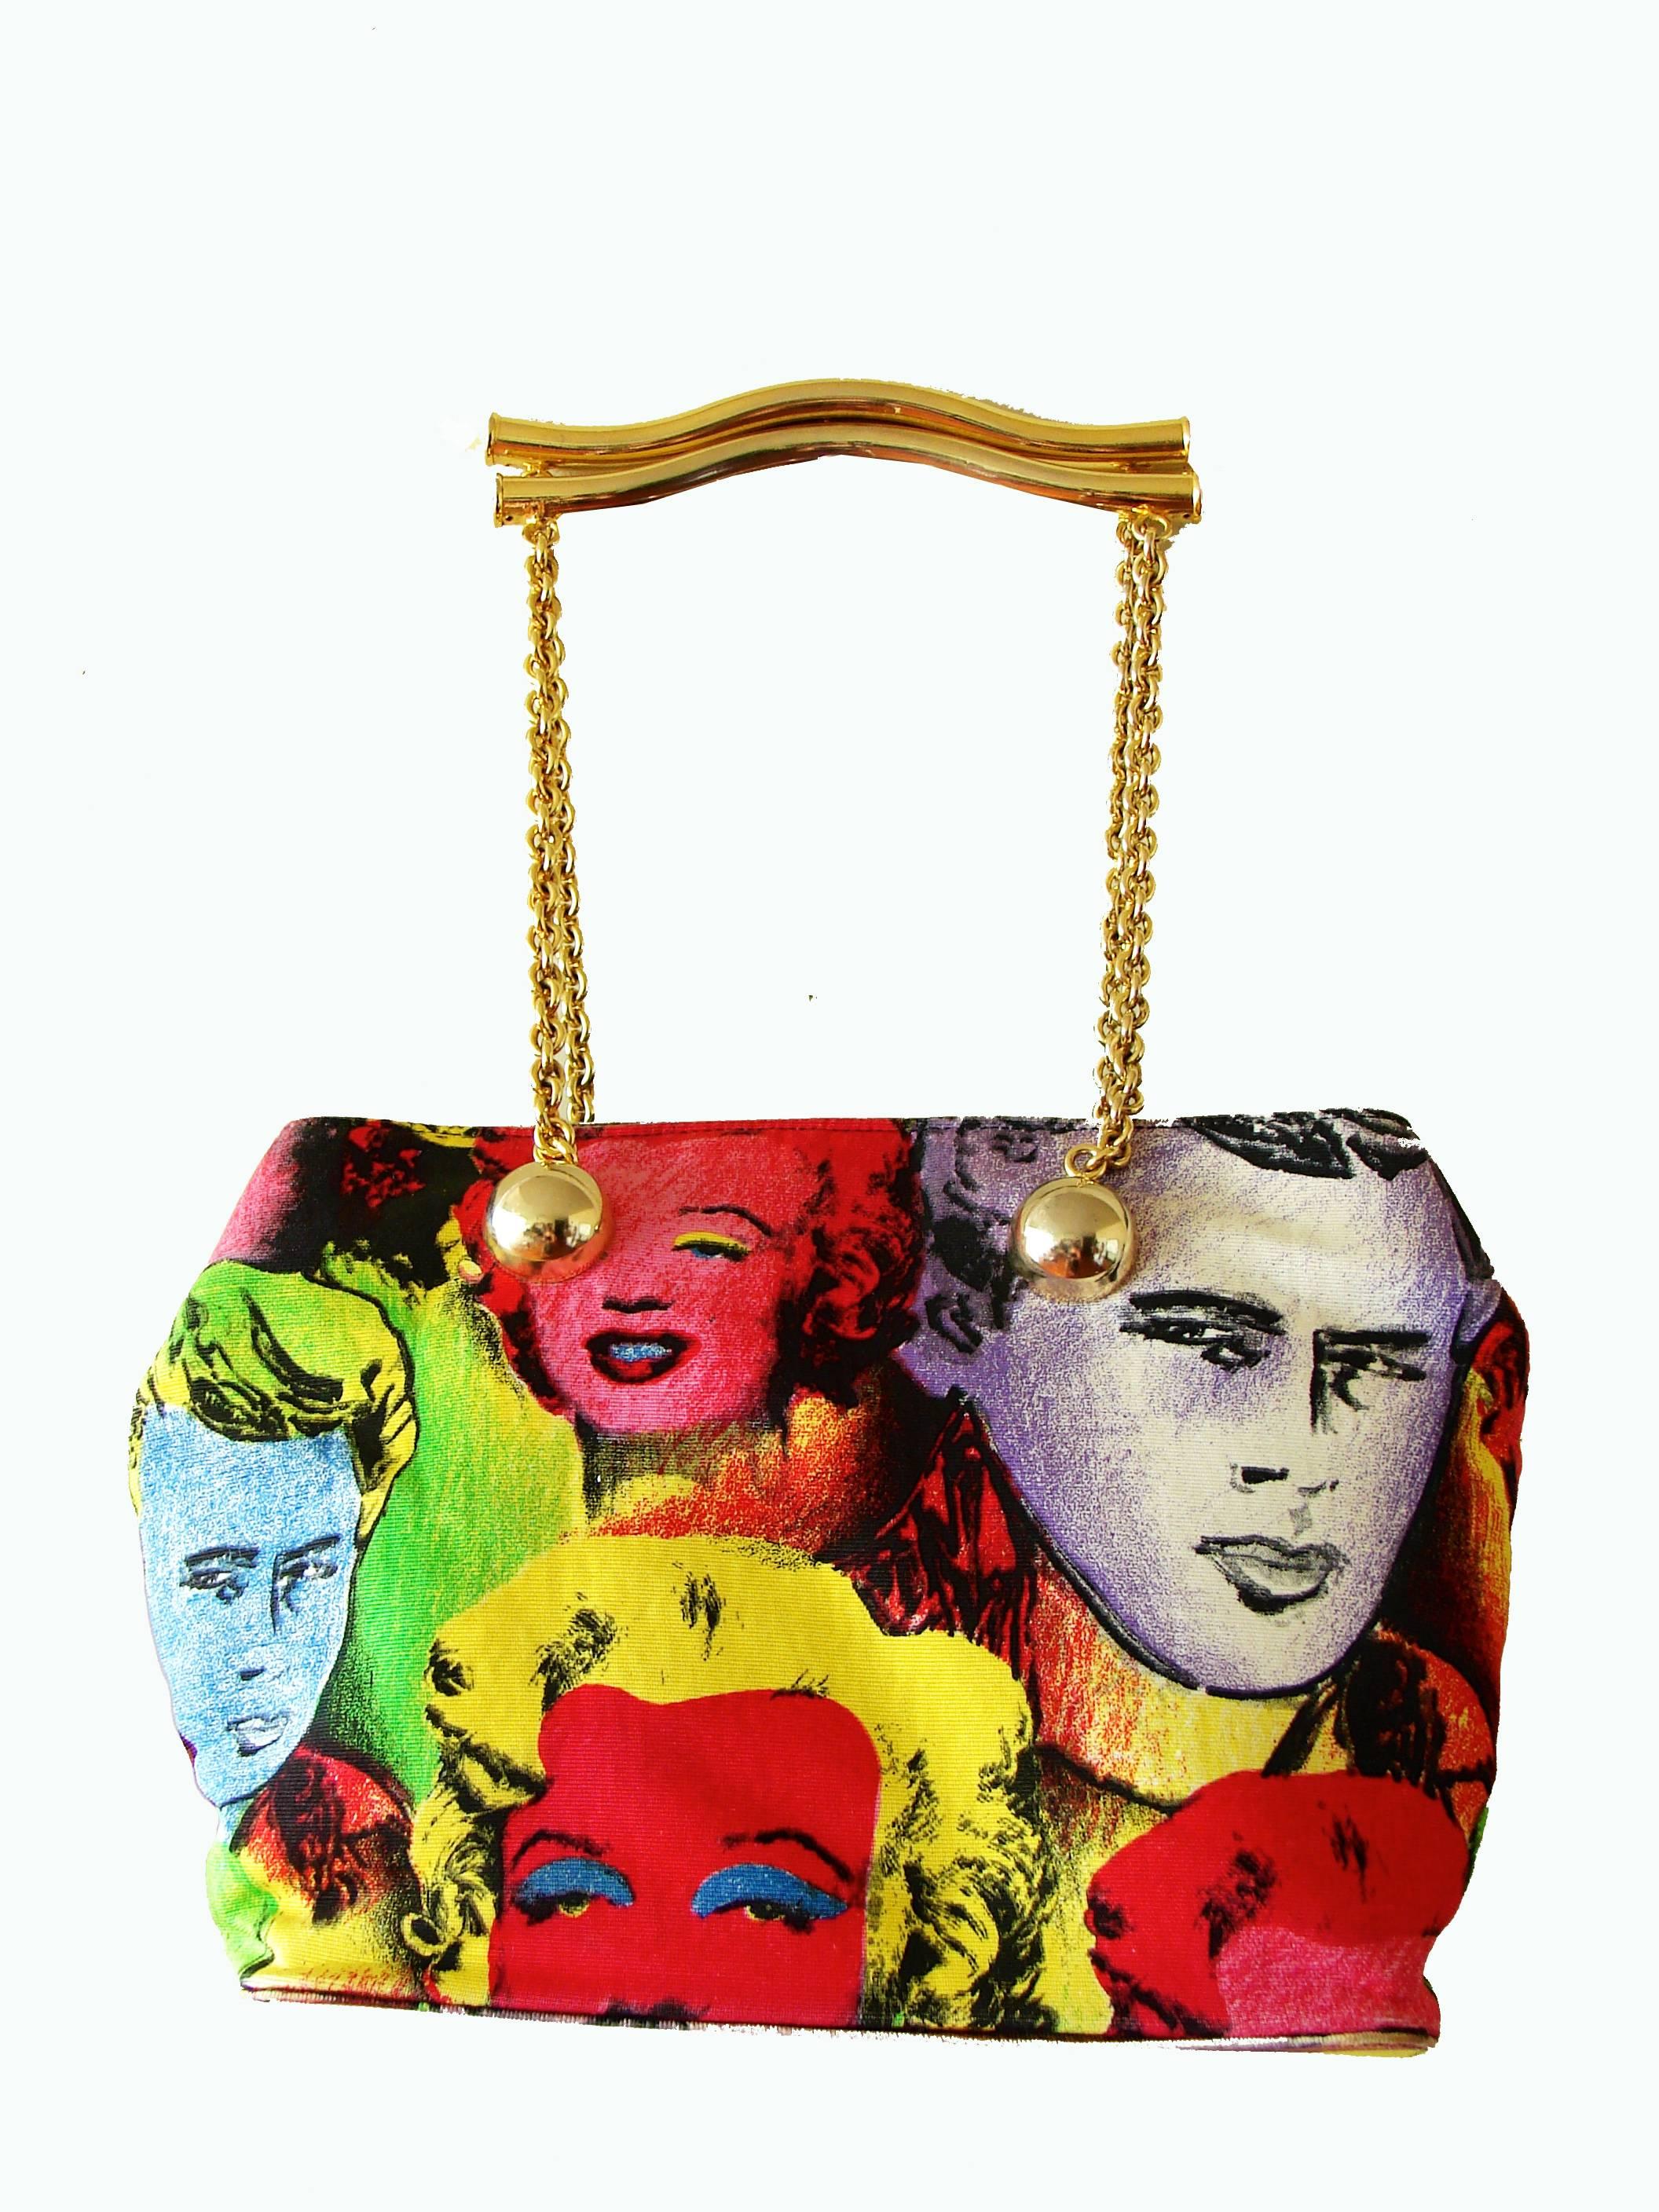 Here's an incredibly rare handbag from Gianni Versace's 1991 Warhol Collection - very similar to the reboot that Donatella recently introduced at Milan Fashion Week.  Made from painted canvas, it features Versace's homage to Warhol's pop art prints